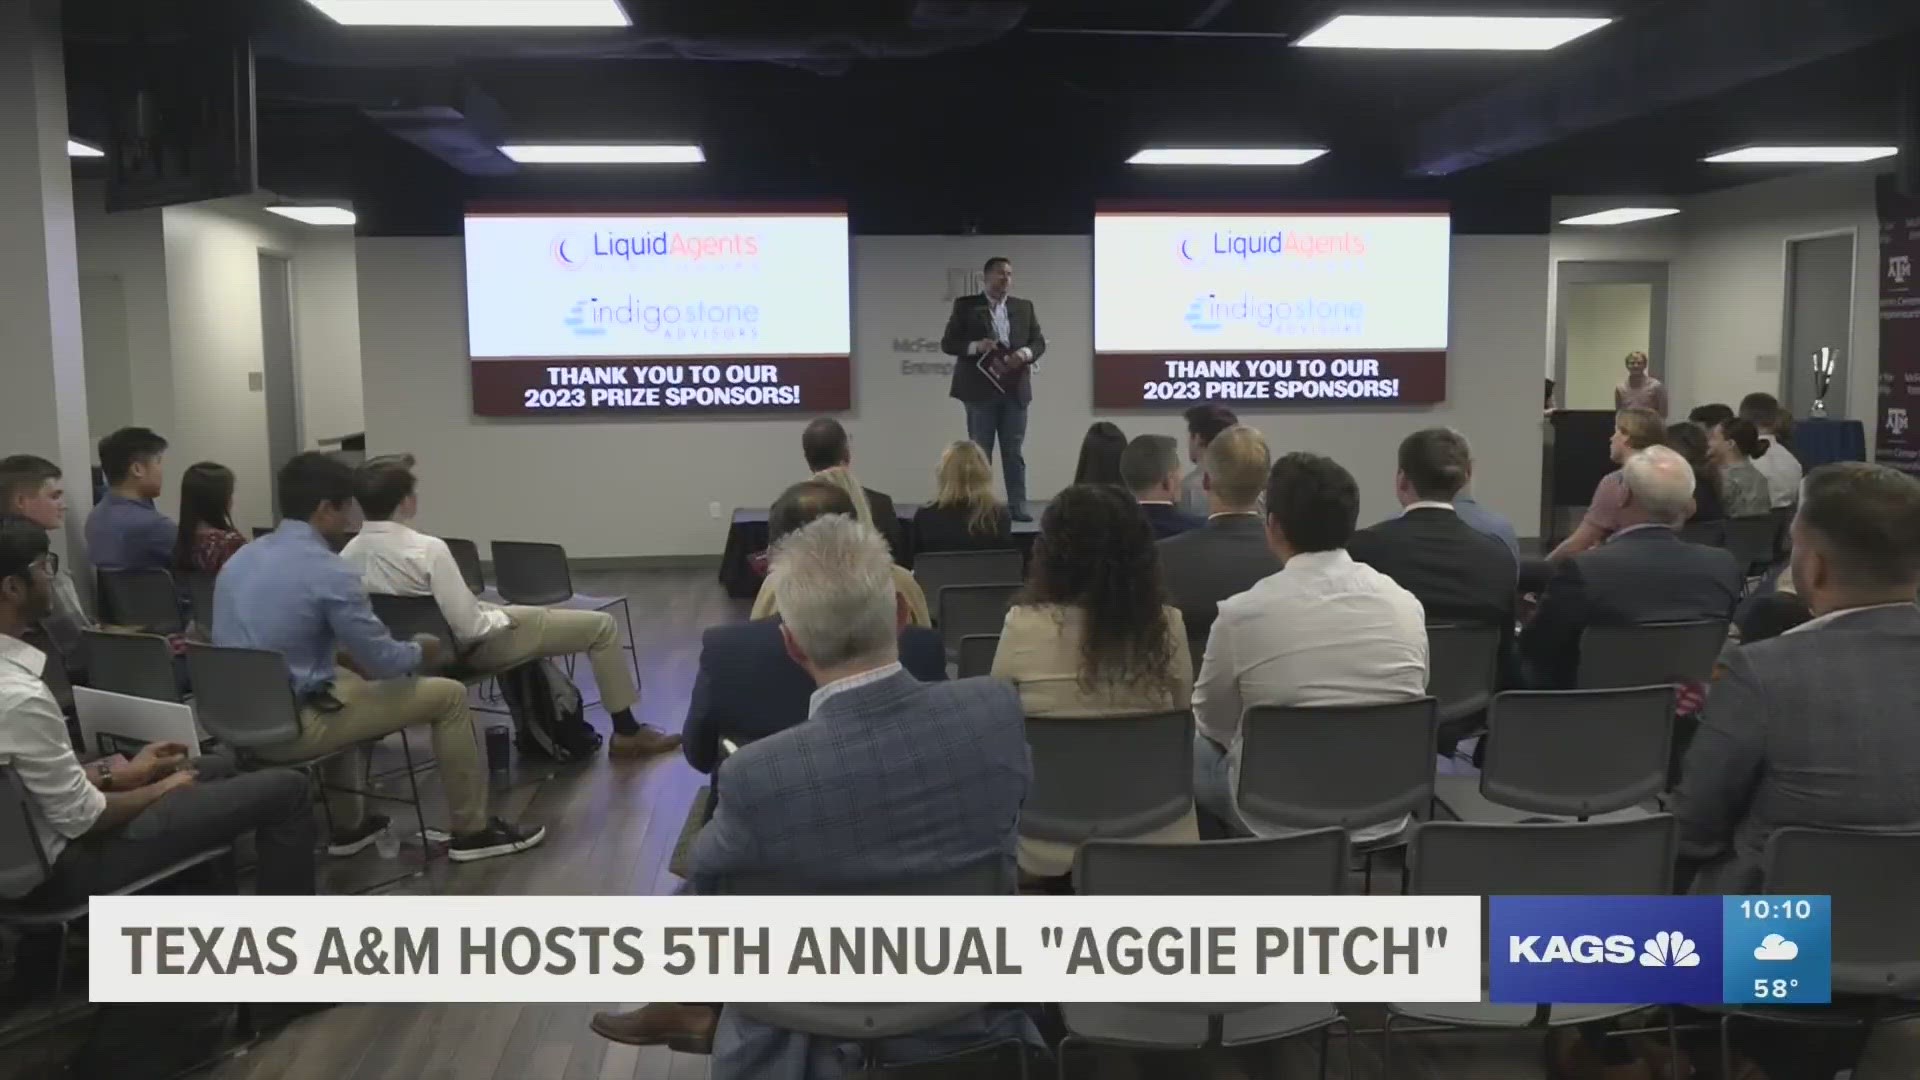 "Aggie Pitch" day is the chance to see which current or former student's small business idea has what it takes to win big.